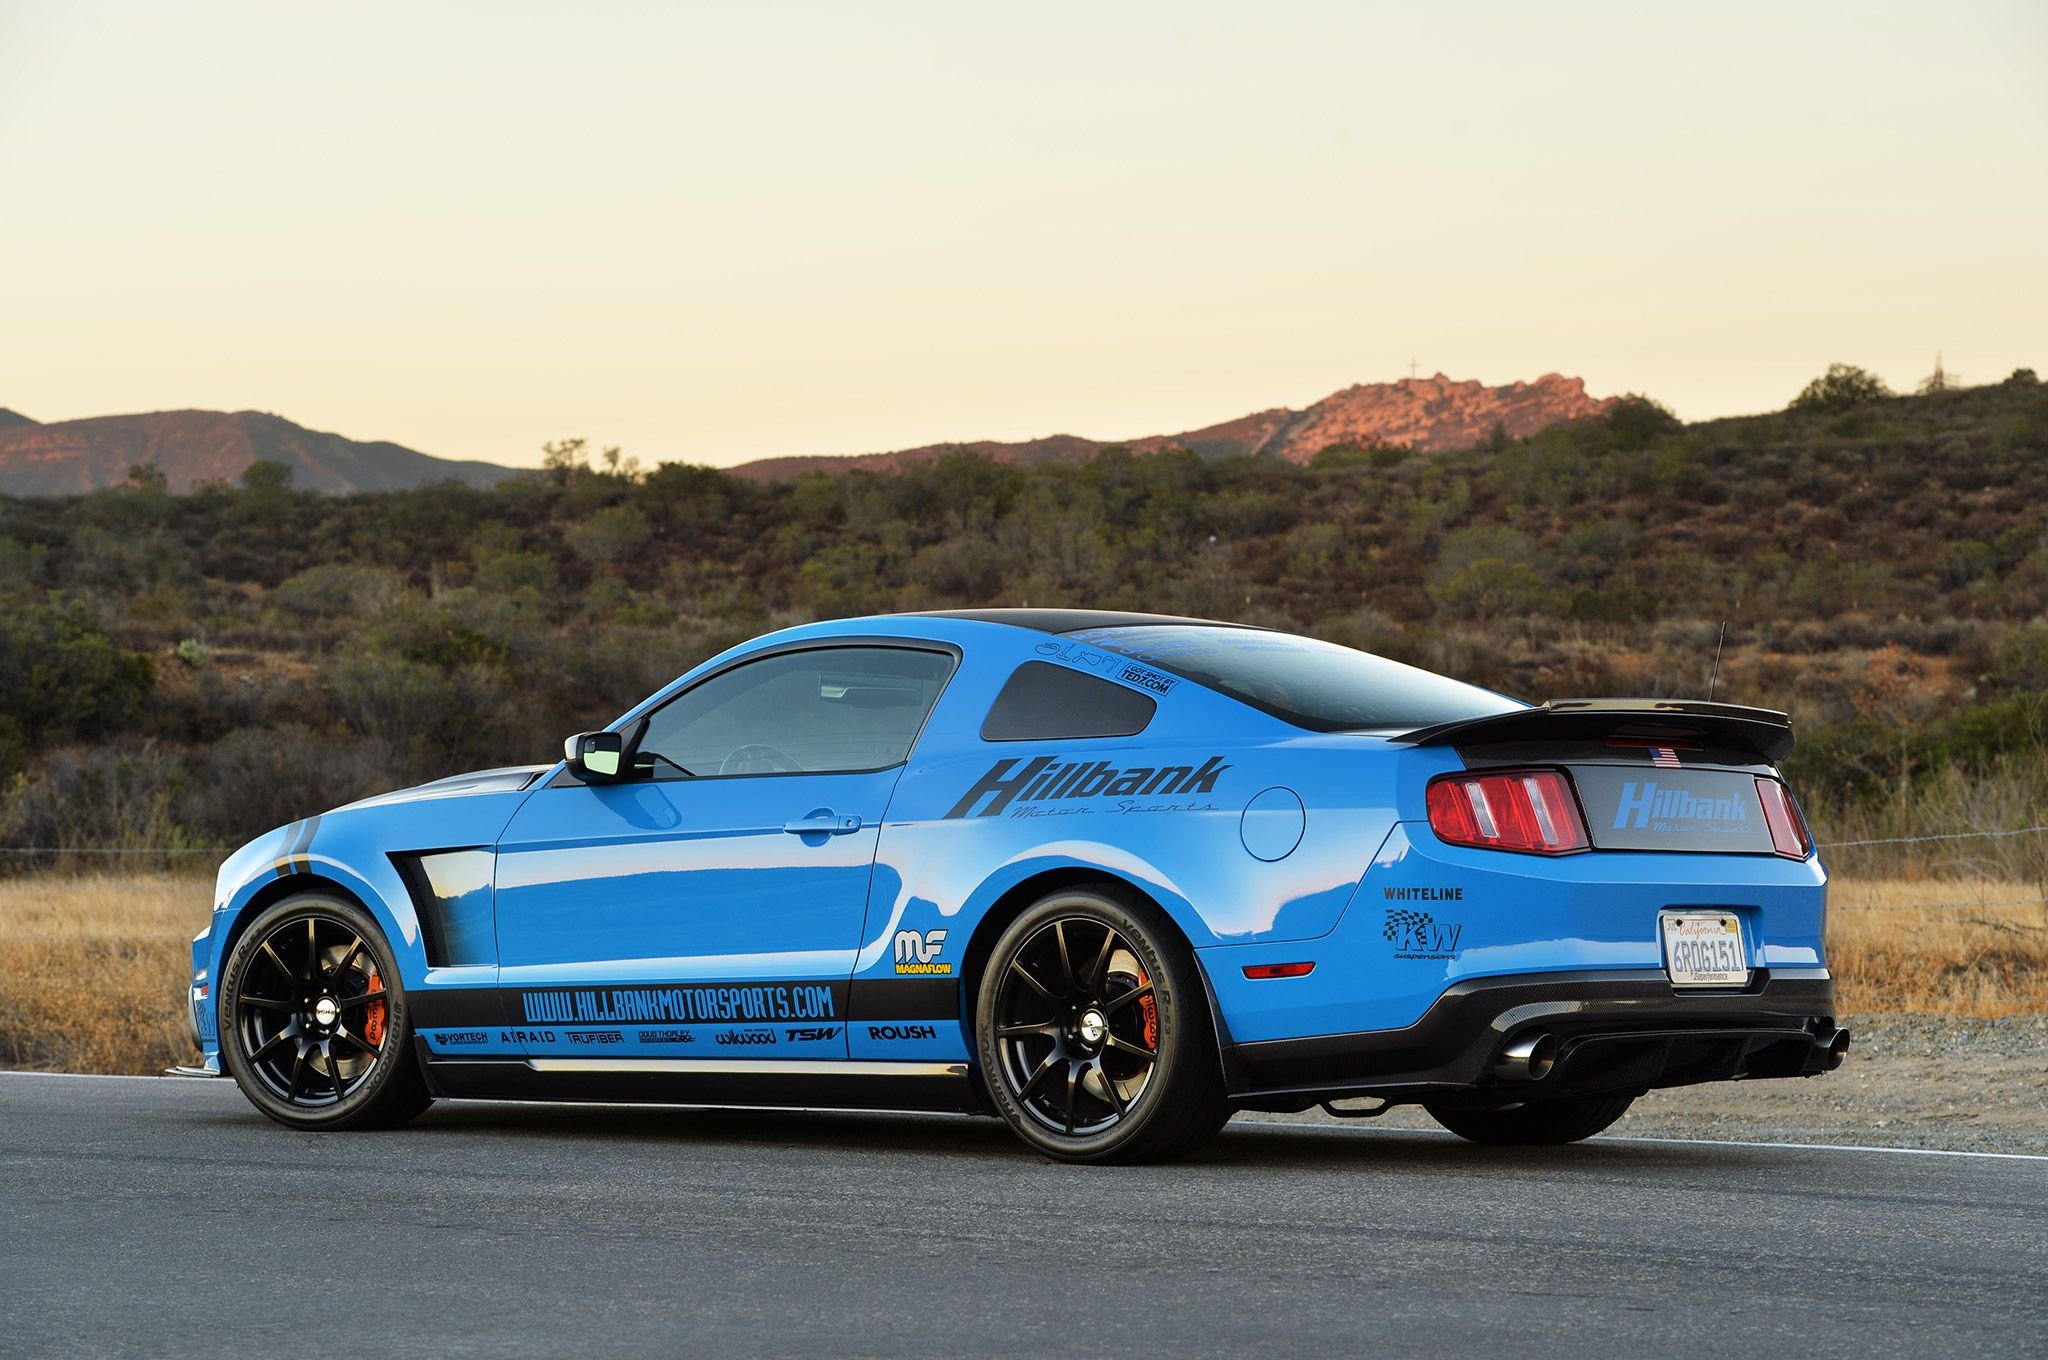 modified, 2012, Grabber, Blue, Ford, Mustang, Gt, Cars Wallpaper